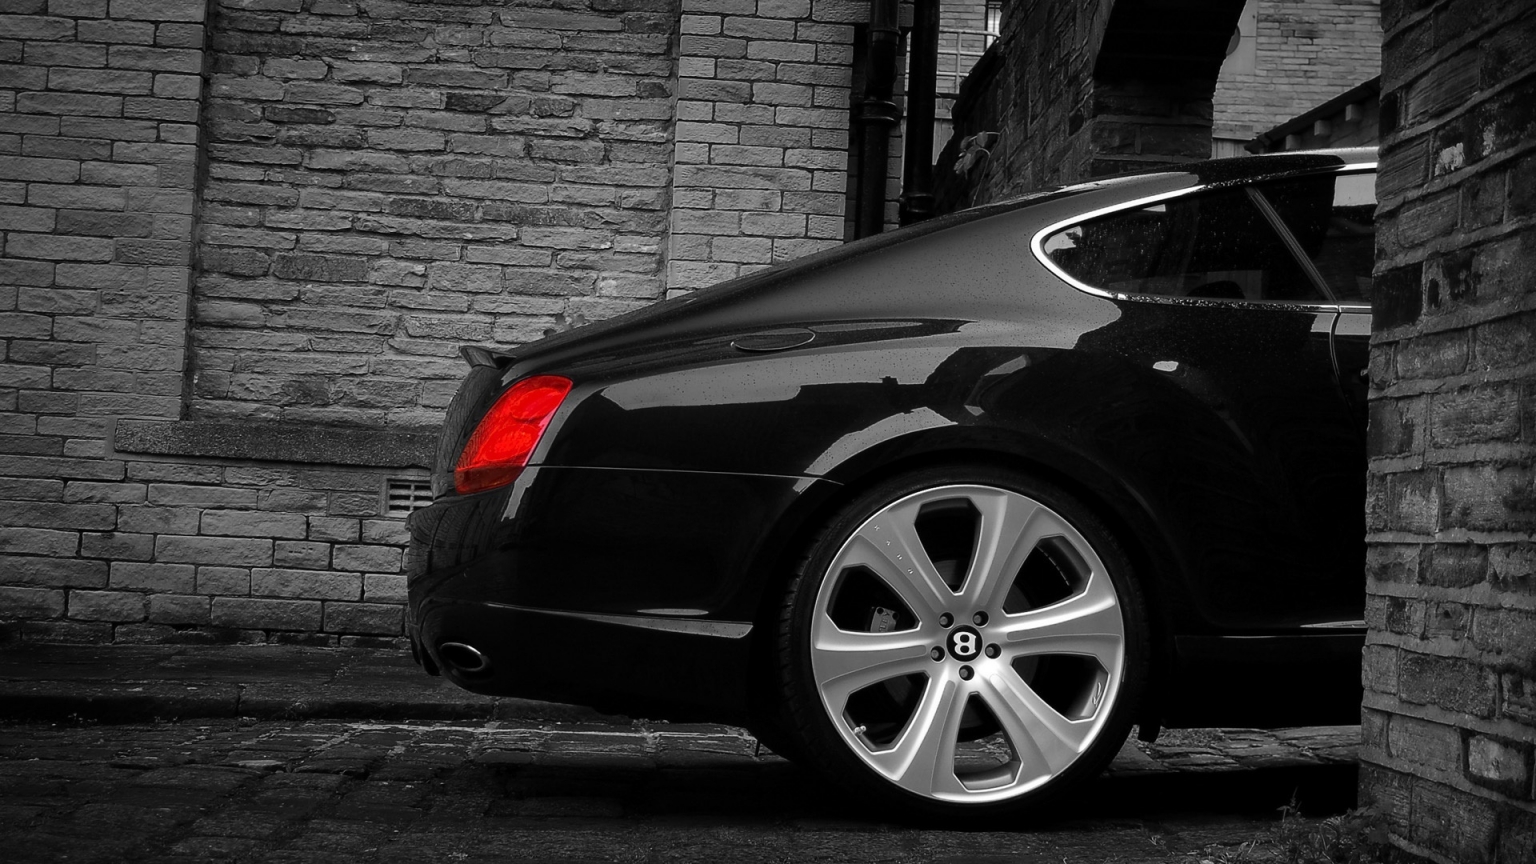 Bentley Continental GT S Project Kahn 2008 Rear for 1536 x 864 HDTV resolution